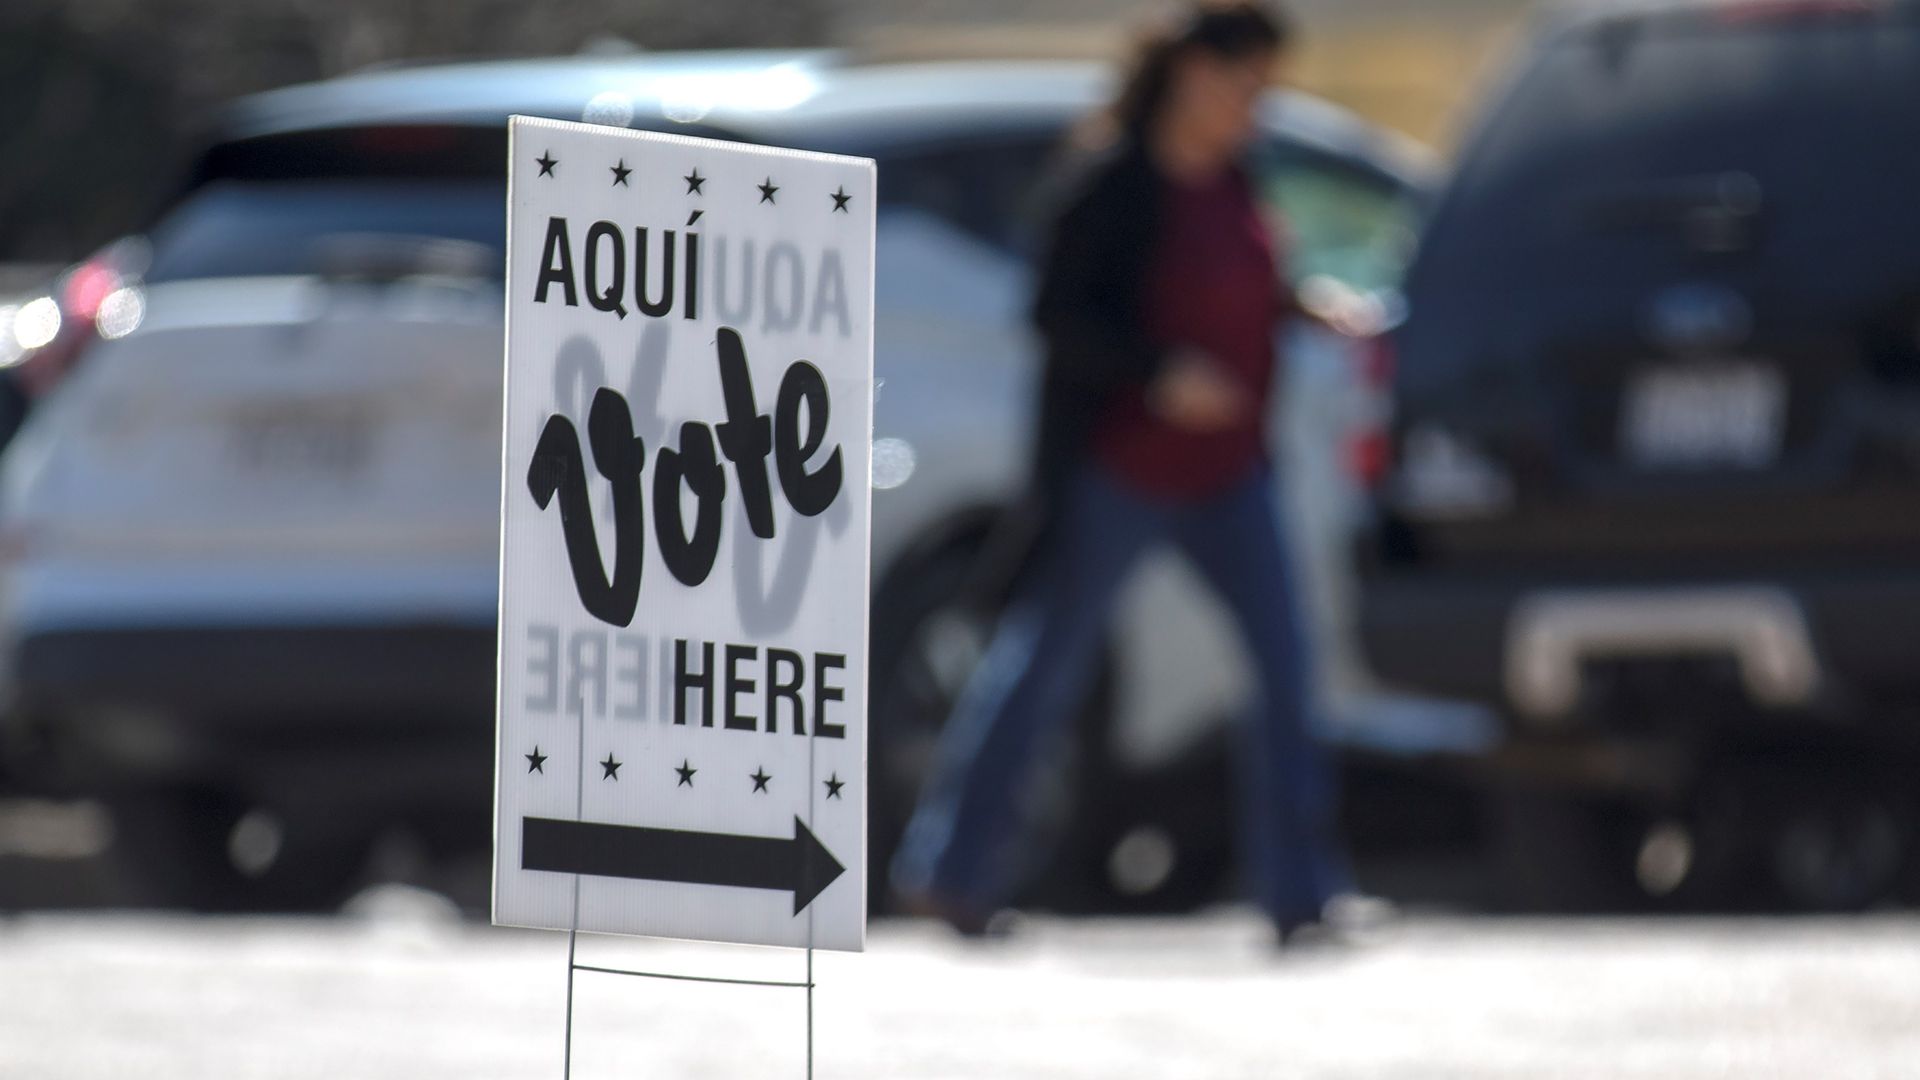 Photo of a sign that says "Aqui, vote here" in a parking lot